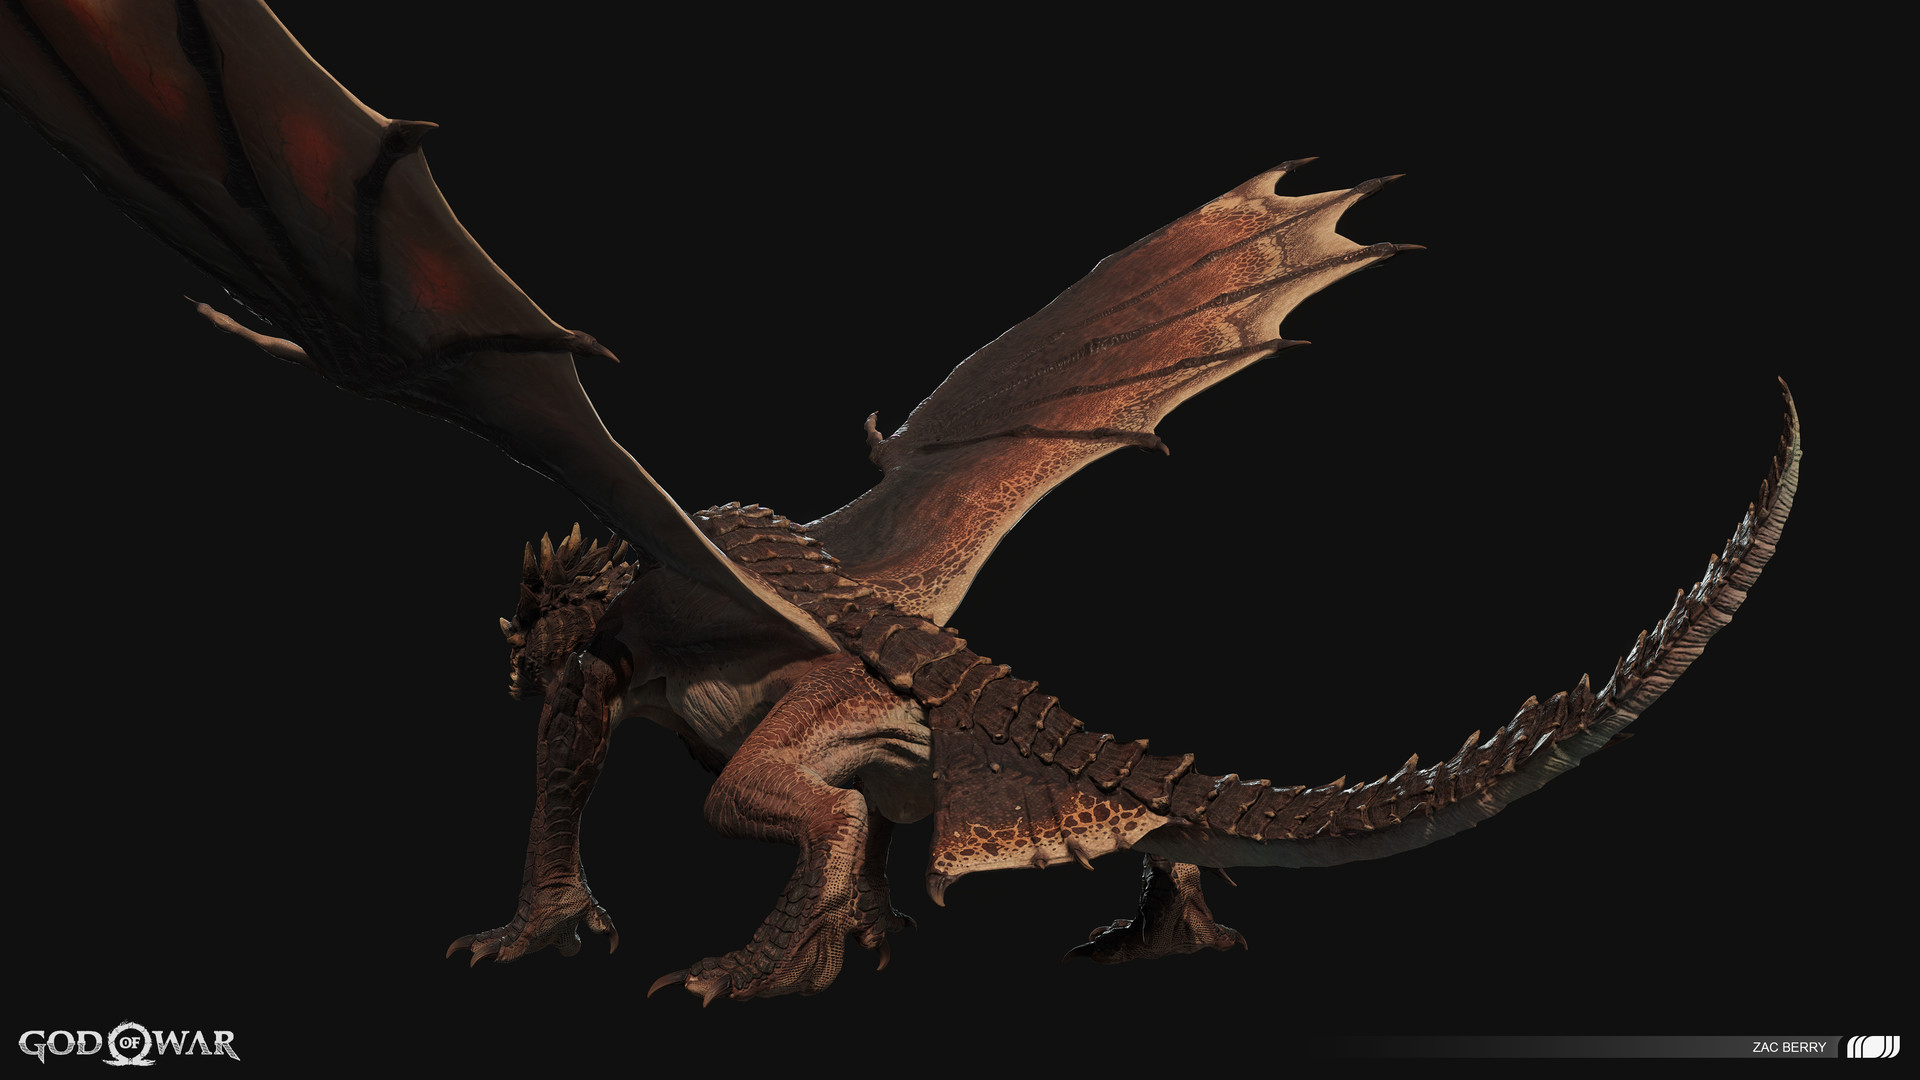 p/assets/images/images/011/415/741/large/zac-berry-dragon-side-view-small.jpg?1529467224